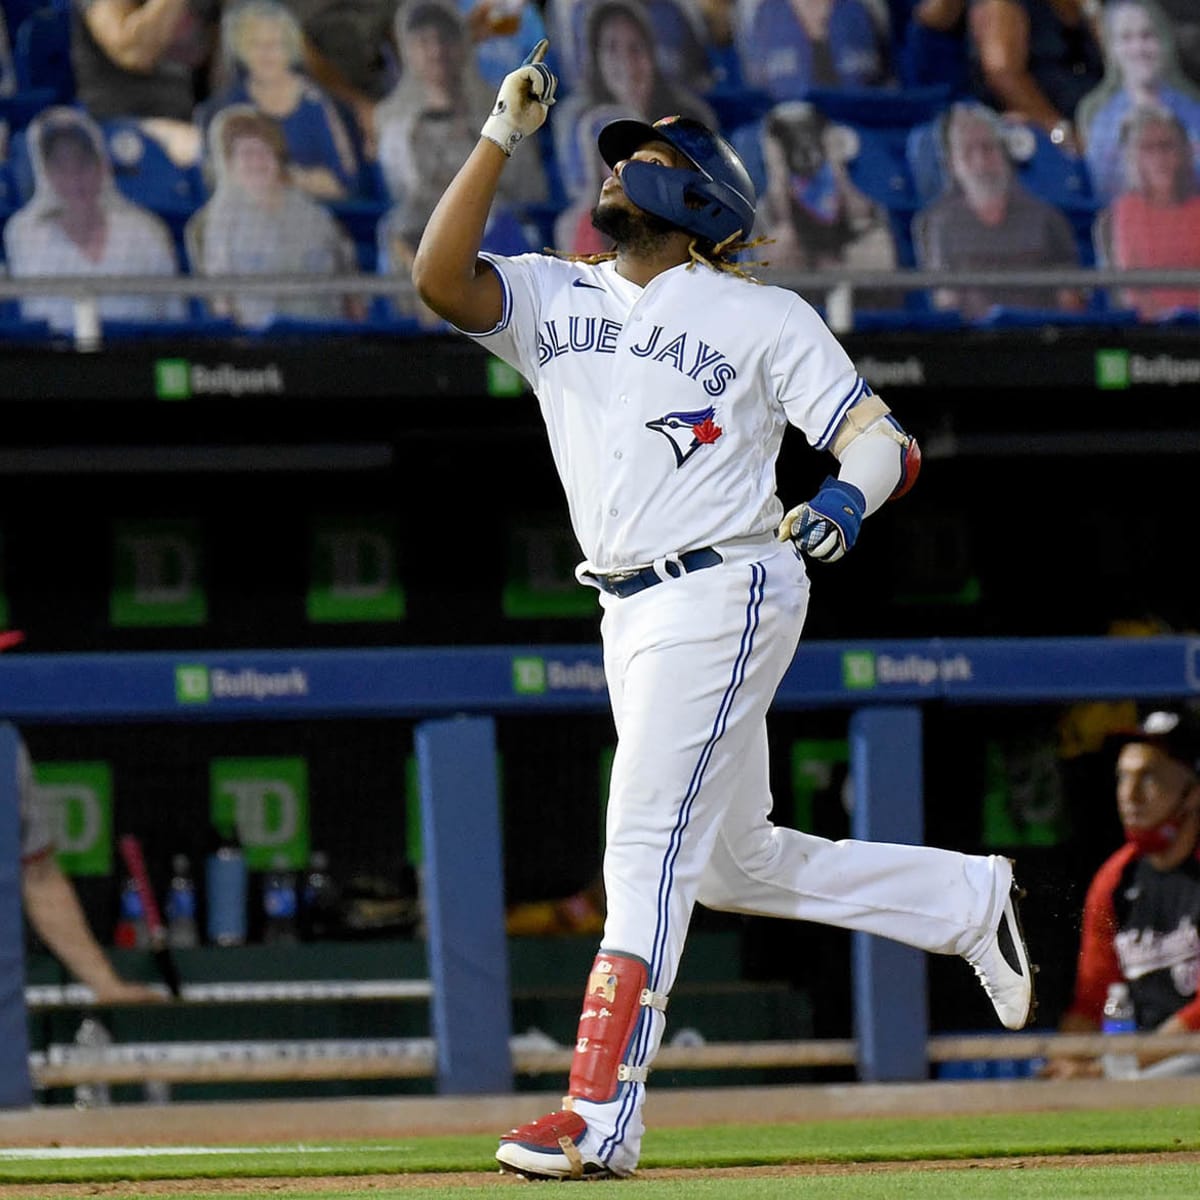 Guerrero Jr. Stopped After A Three Home Run Night – Latino Sports